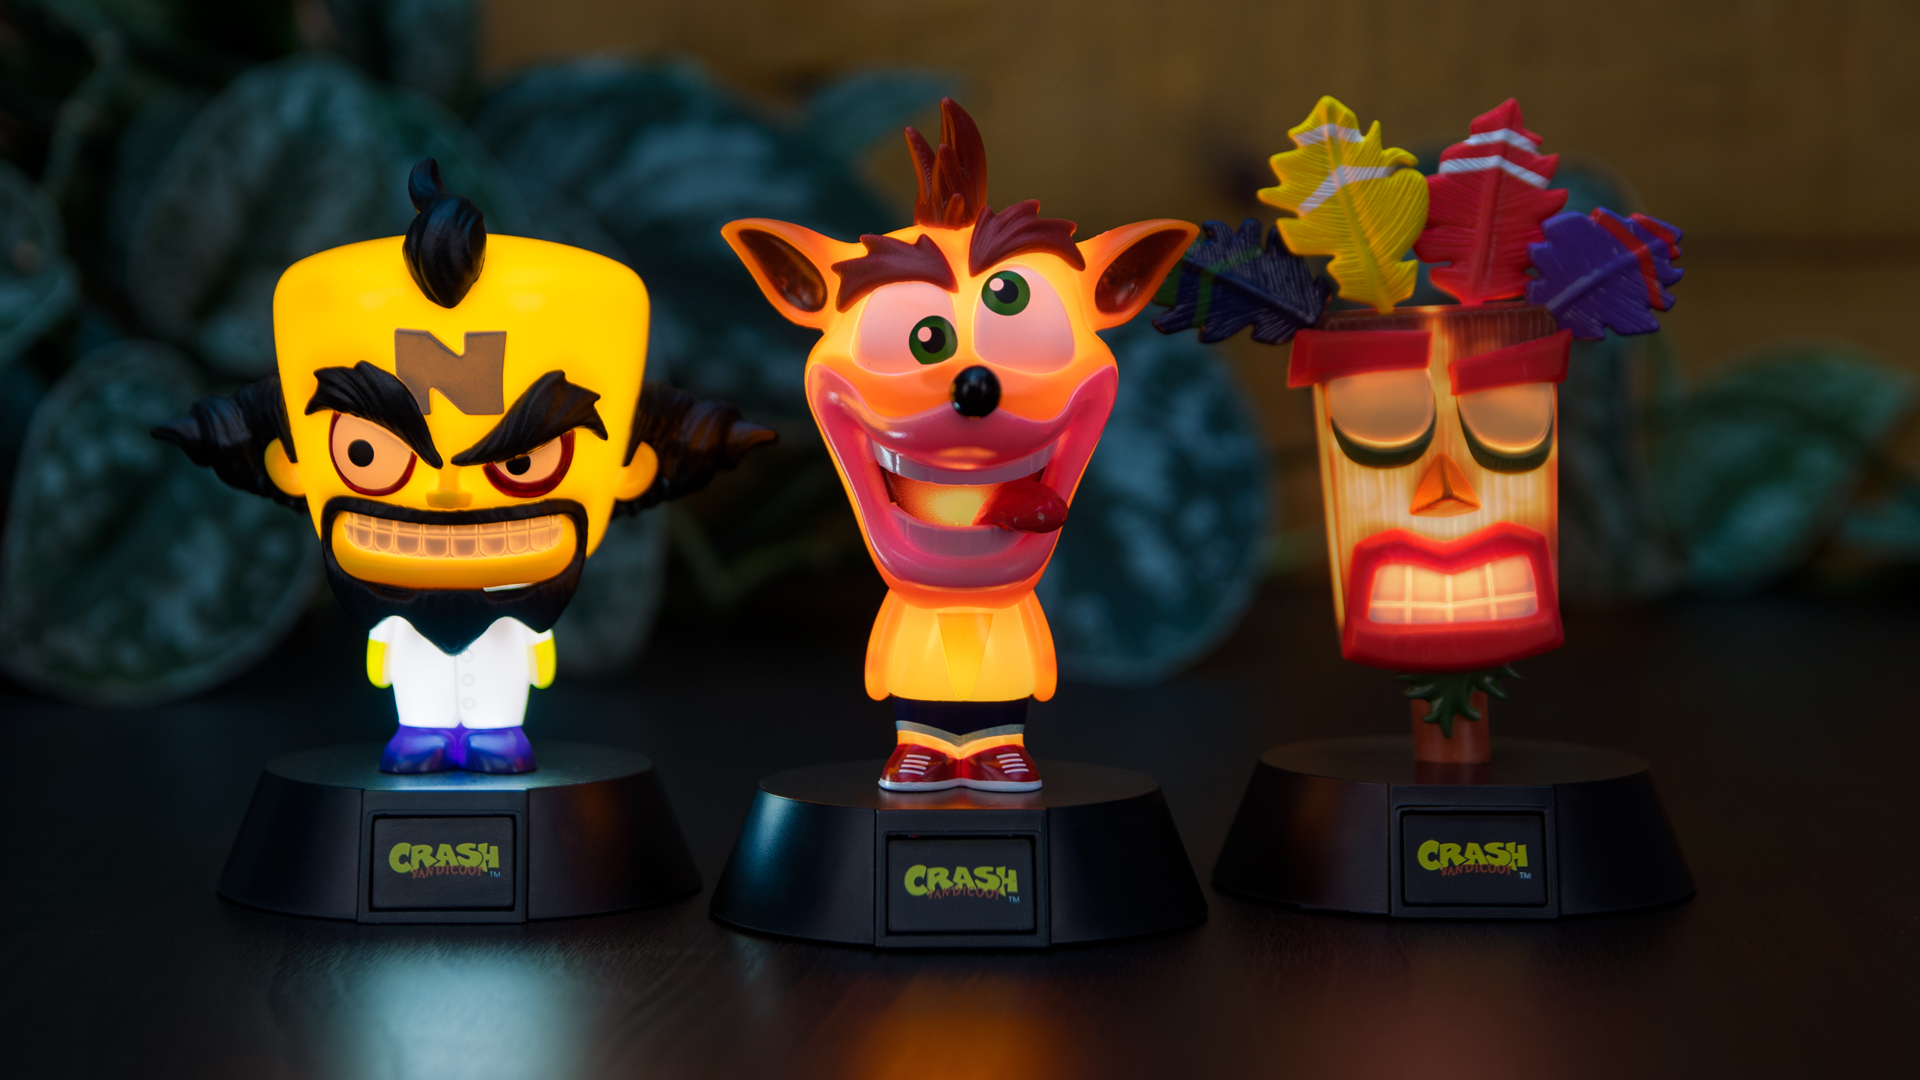 Paladone’s new Crash Bandicoot Icon Lights now available